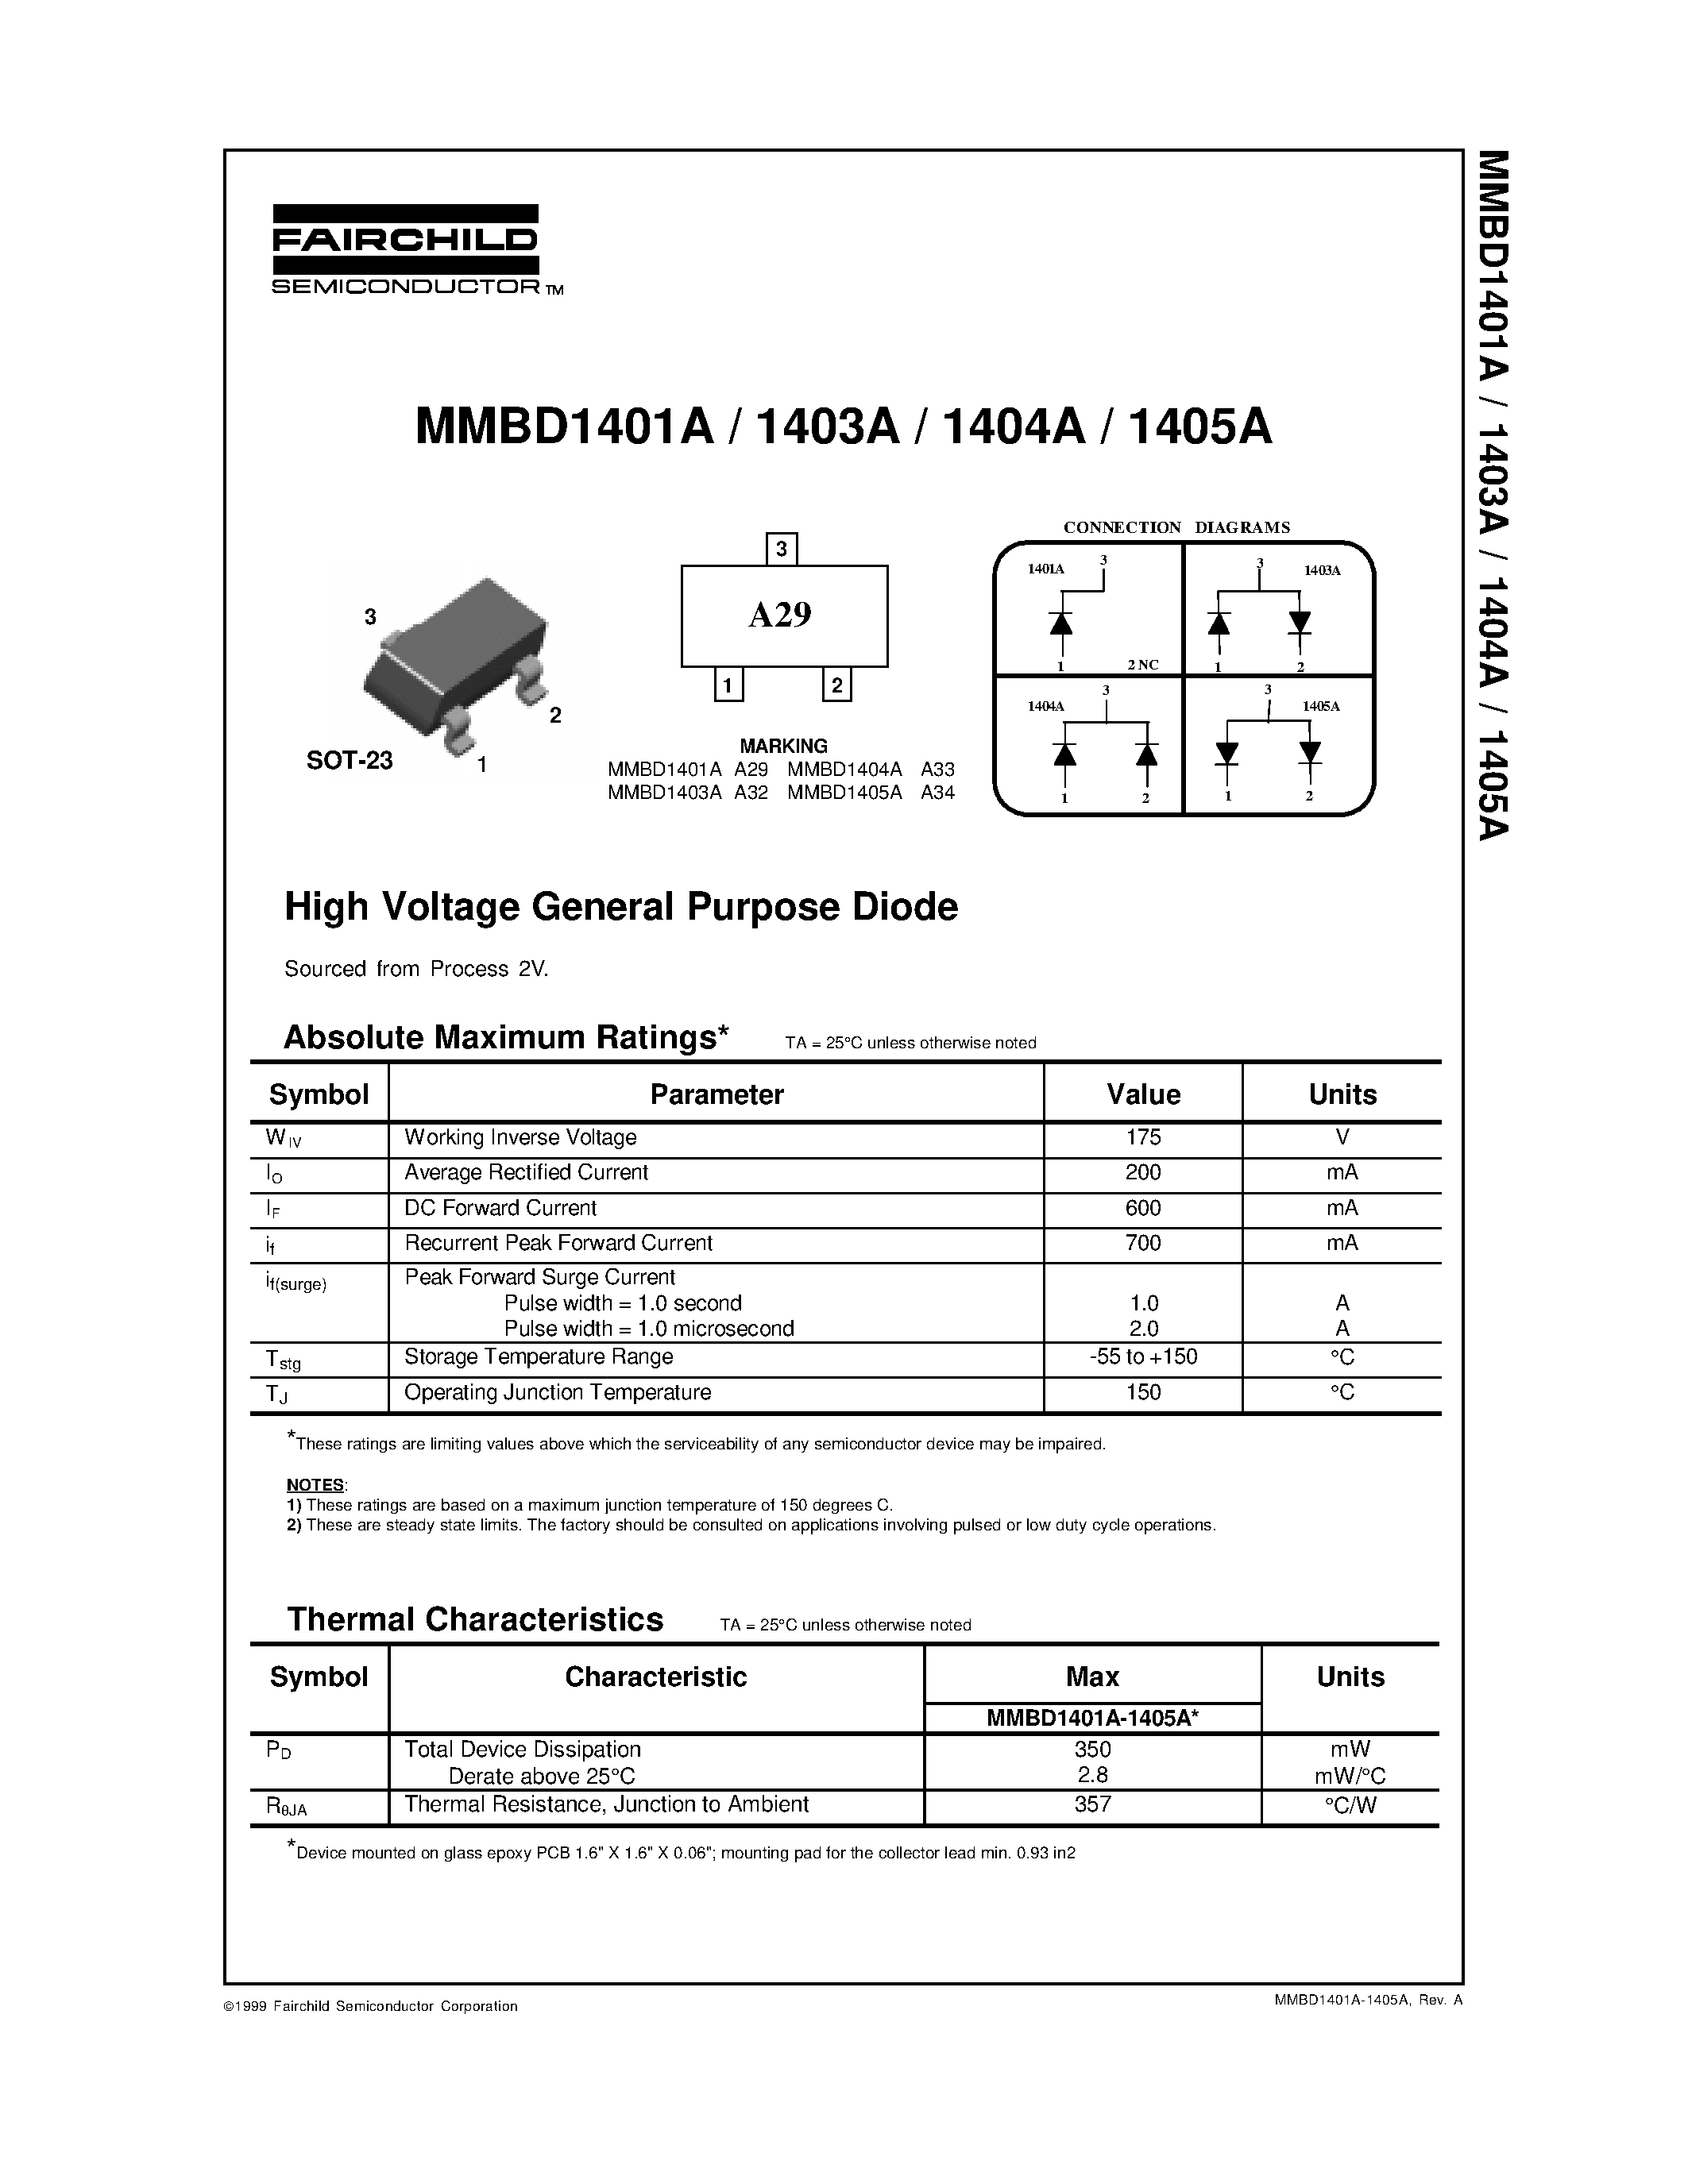 Даташит MMBD1405A - High Voltage General Purpose Diode страница 1